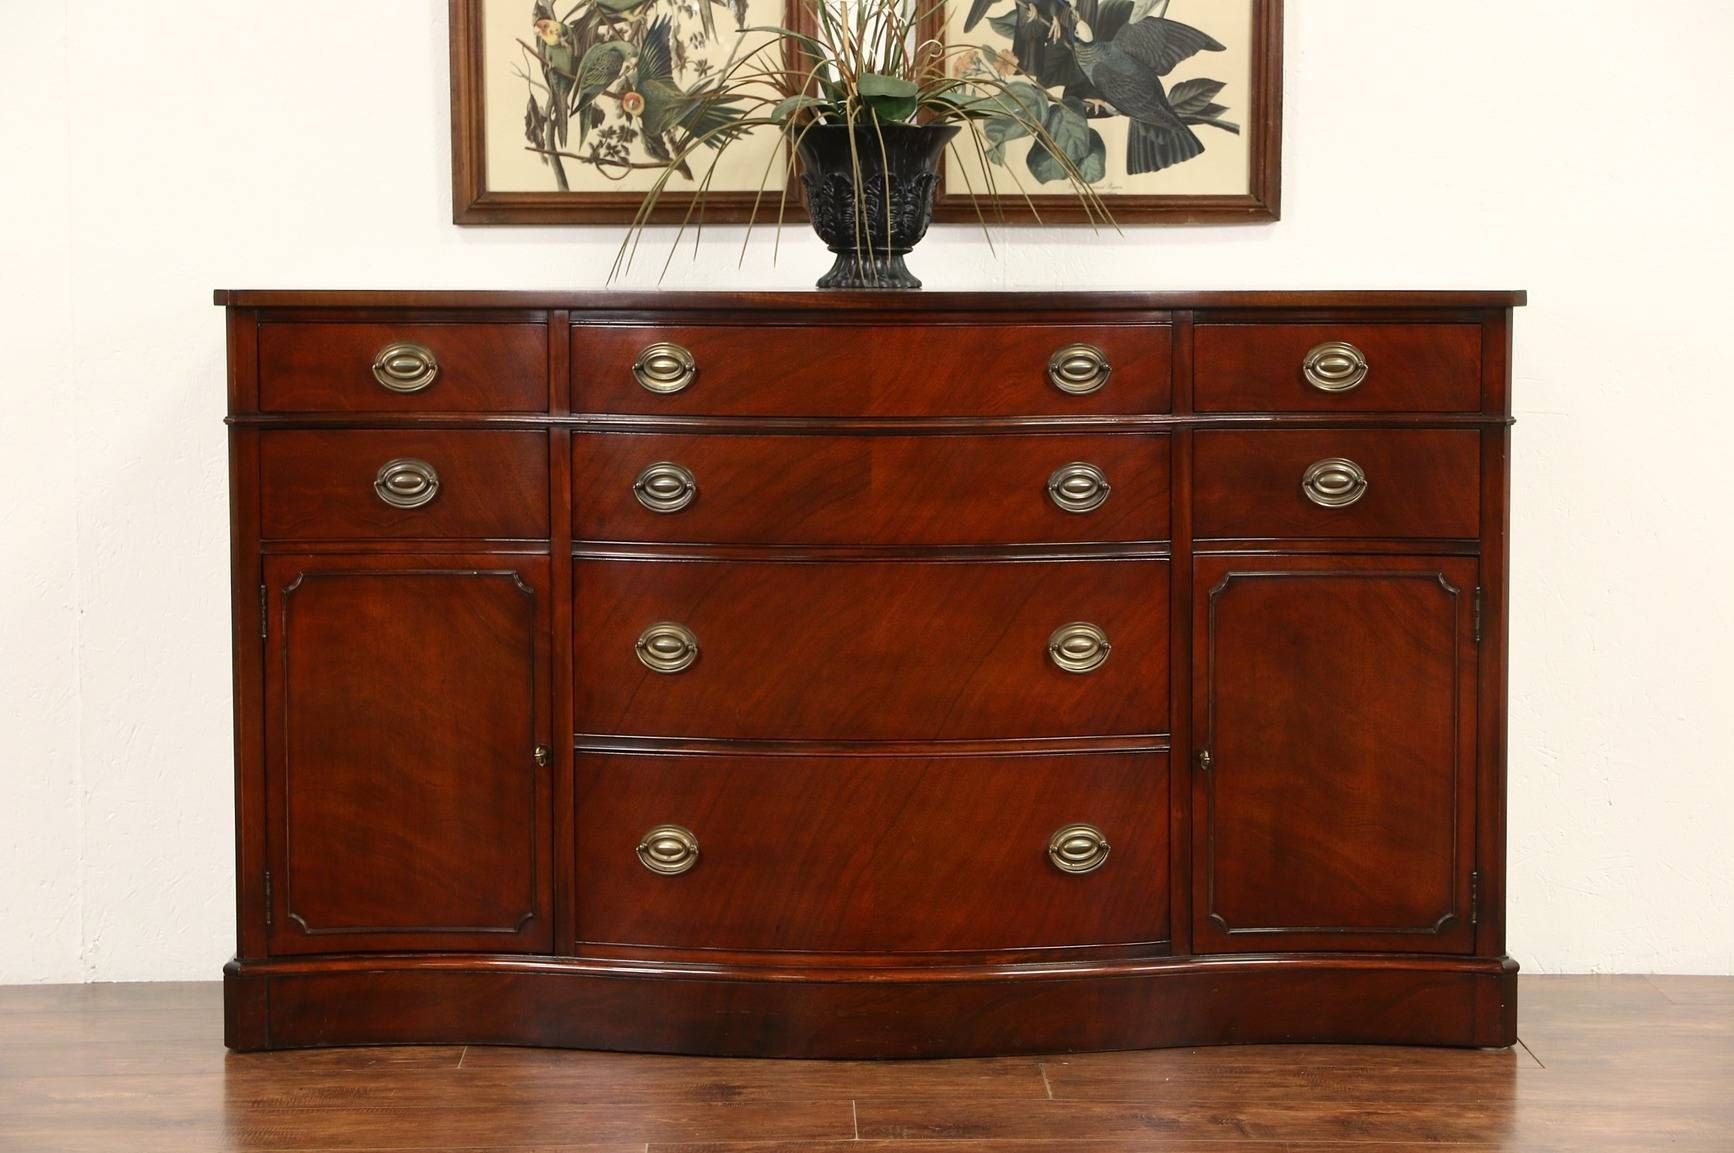 Sold – Drexel Travis Court Mahogany Sideboard, Buffet Or Server Regarding Recent Mahogany Sideboards Buffets (Photo 6 of 15)